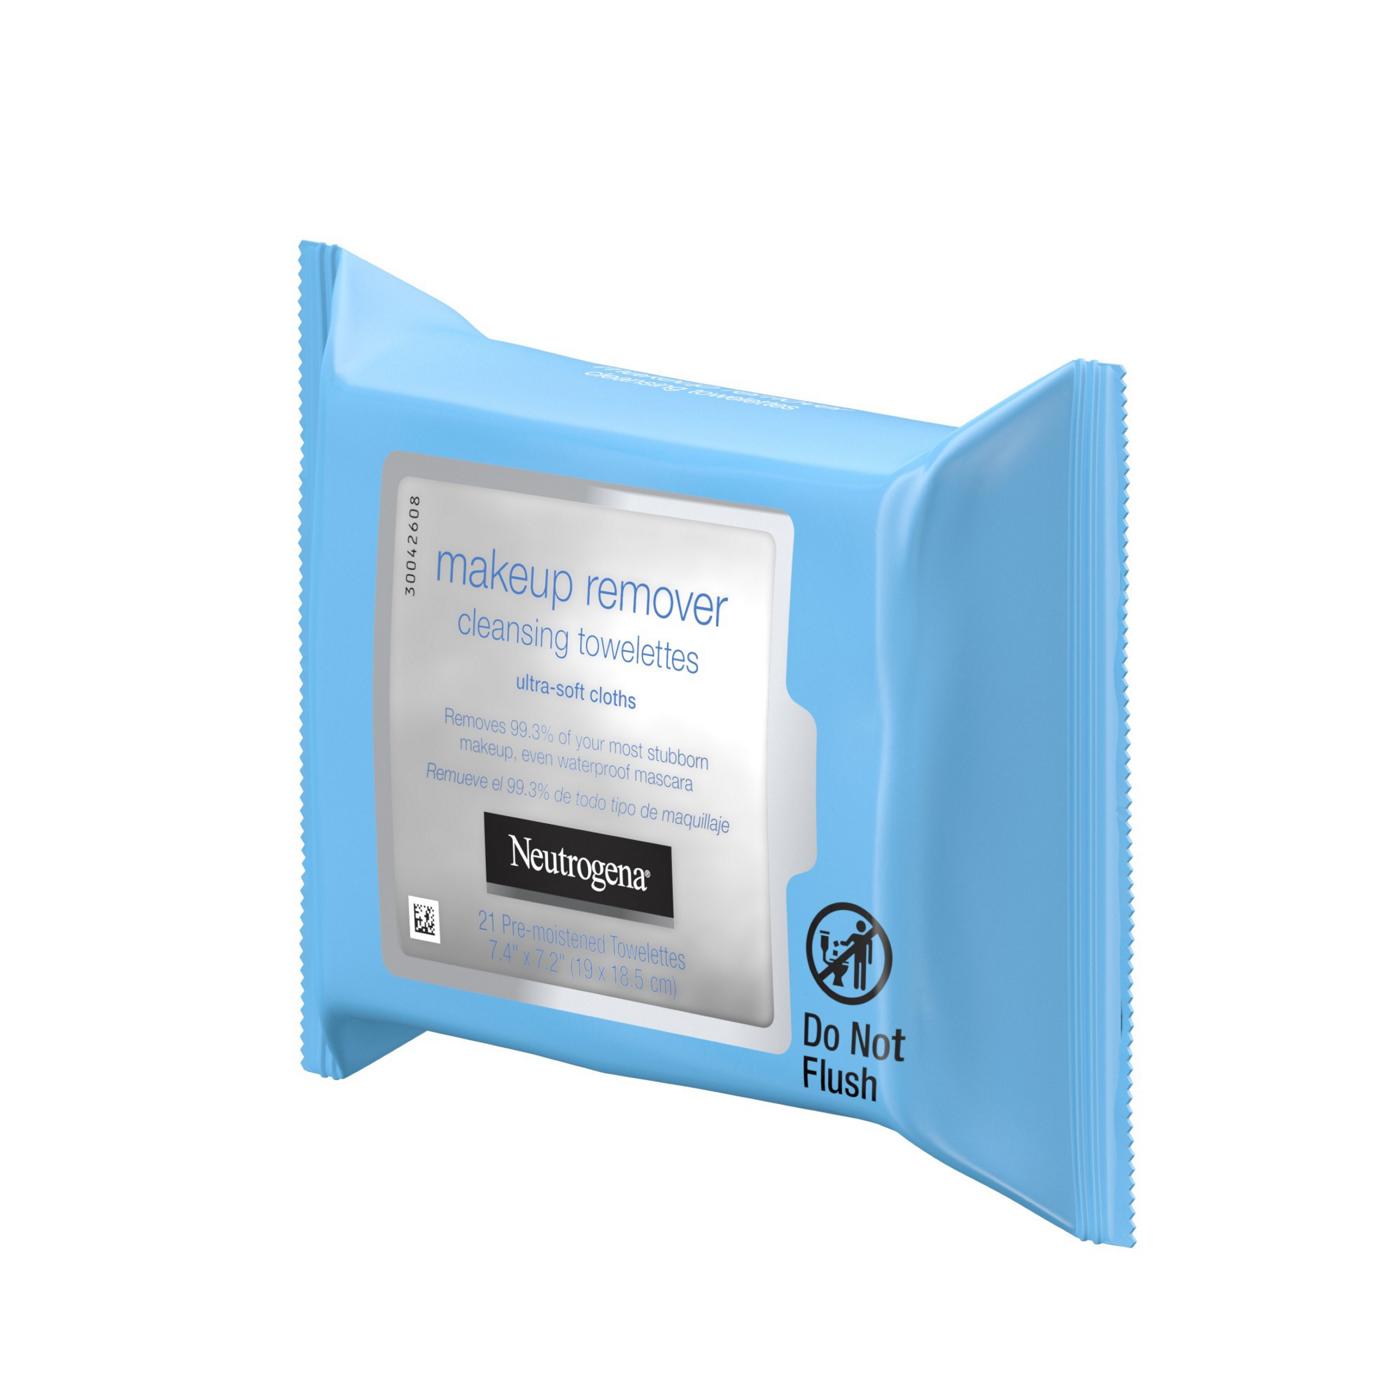 Neutrogena Makeup Remover Cleansing Towelettes; image 3 of 5